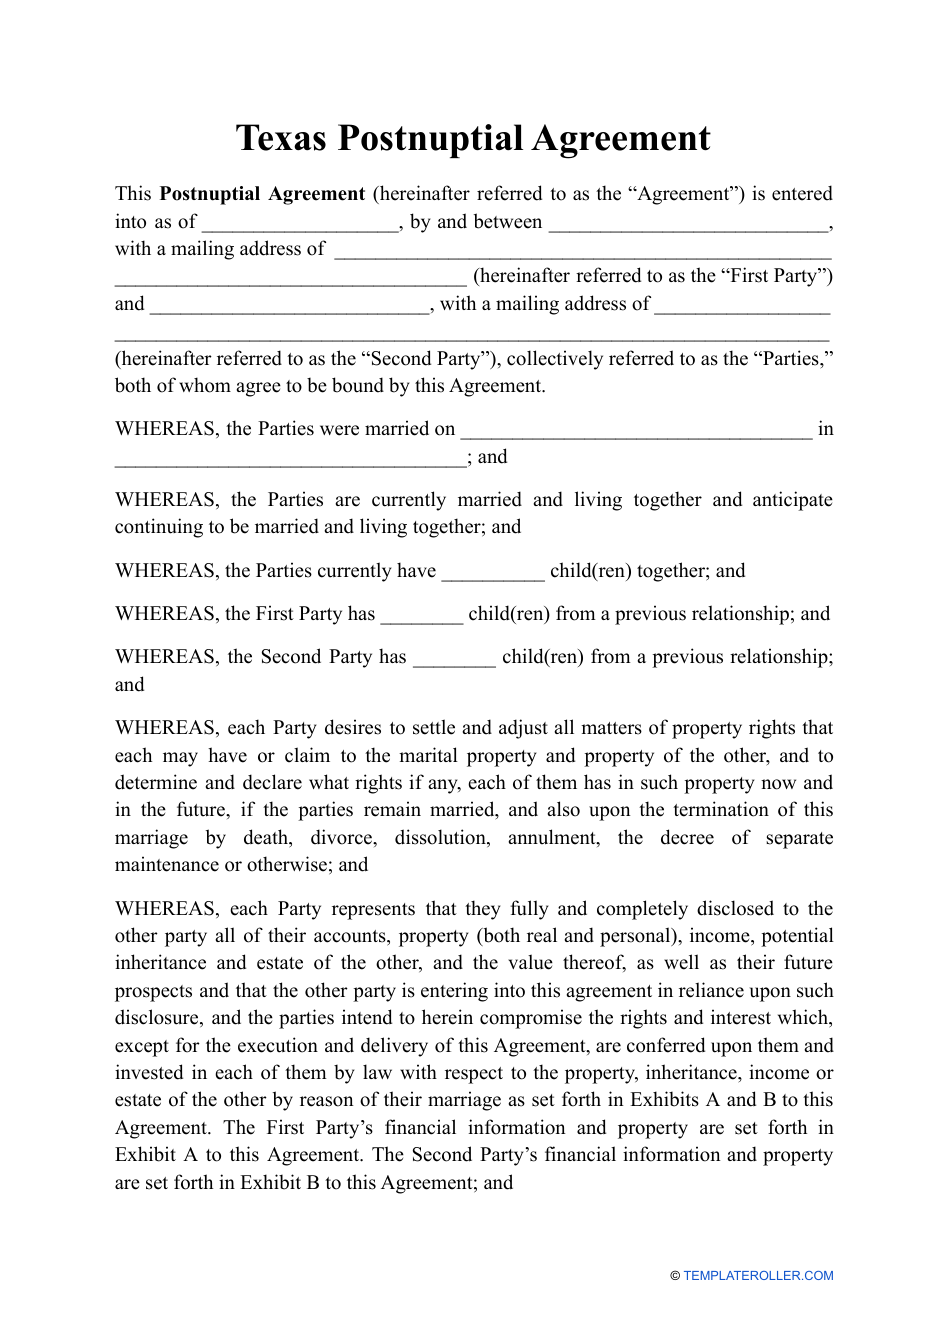 Postnuptial Agreement Template - Texas, Page 1